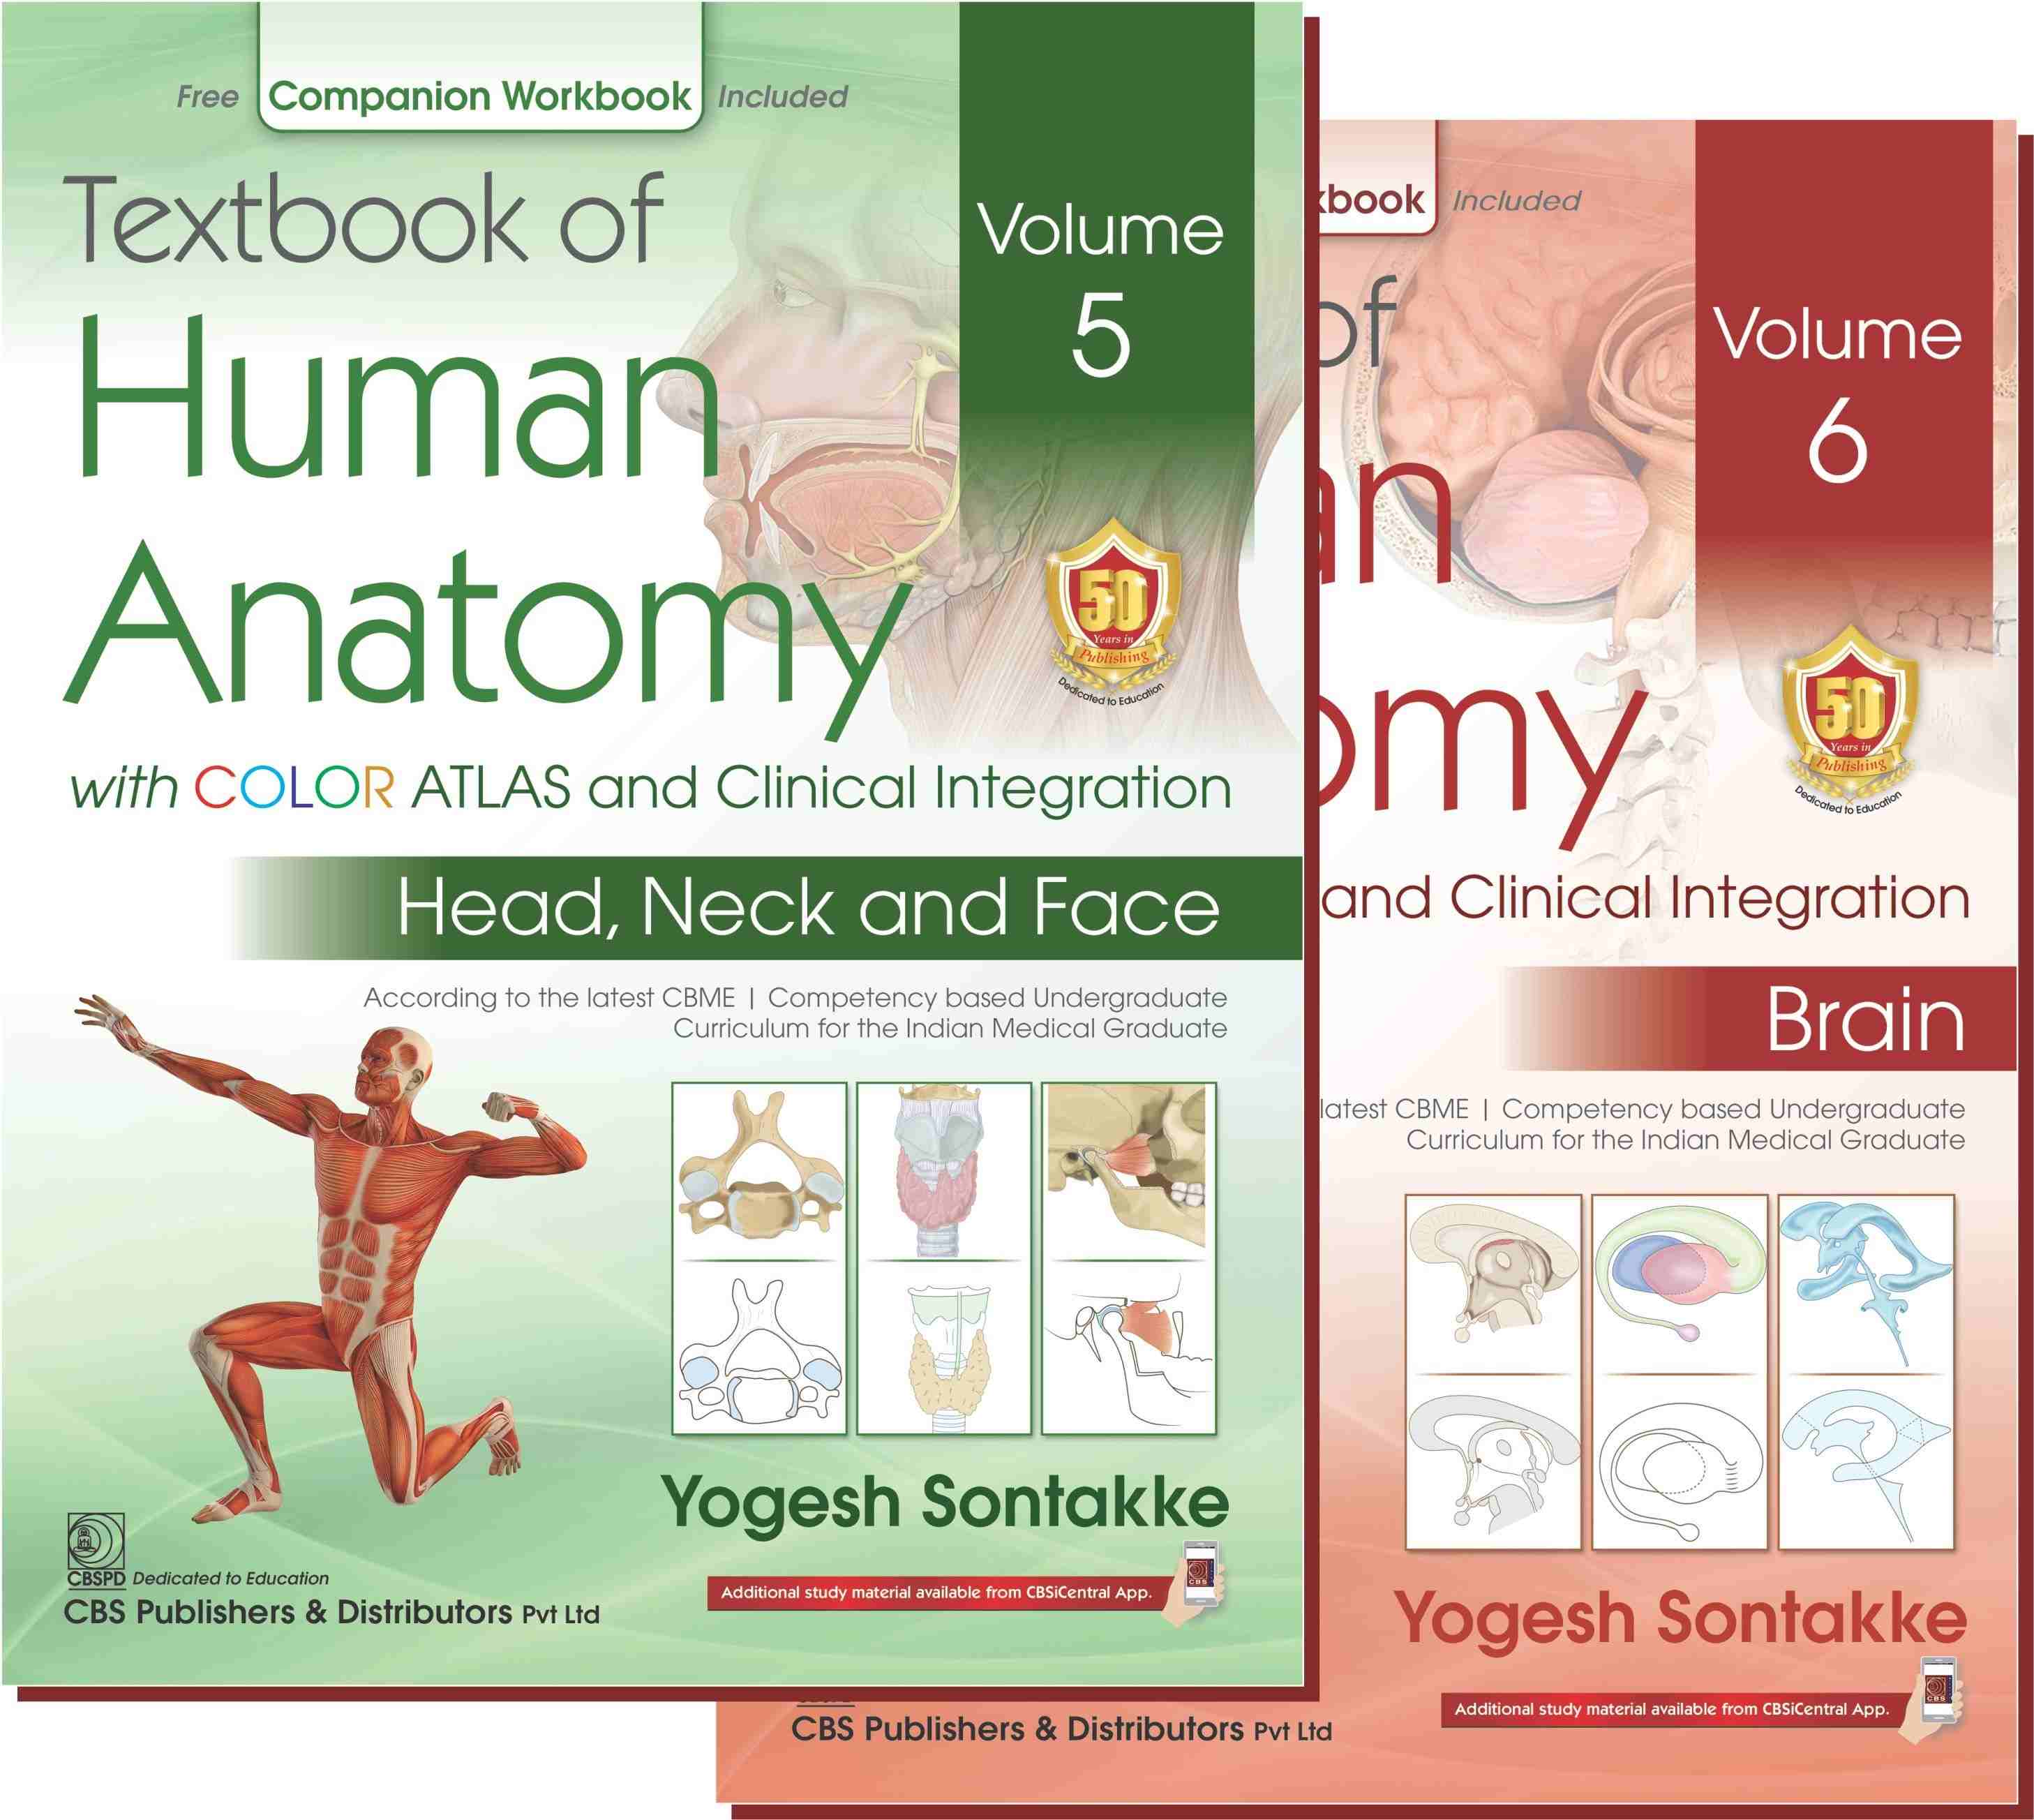 TEXTBOOK OF HUMAN ANATOMY WITH COLOR ATLAS AND CLINICAL INTEGRATION 2 VOL SET (VOL 5- HEAD NECK AND FACE AND VOL 6-BRAIN) WITH COMPANION WORKBOOK (PB 2023)- ISBN: 9789354661792